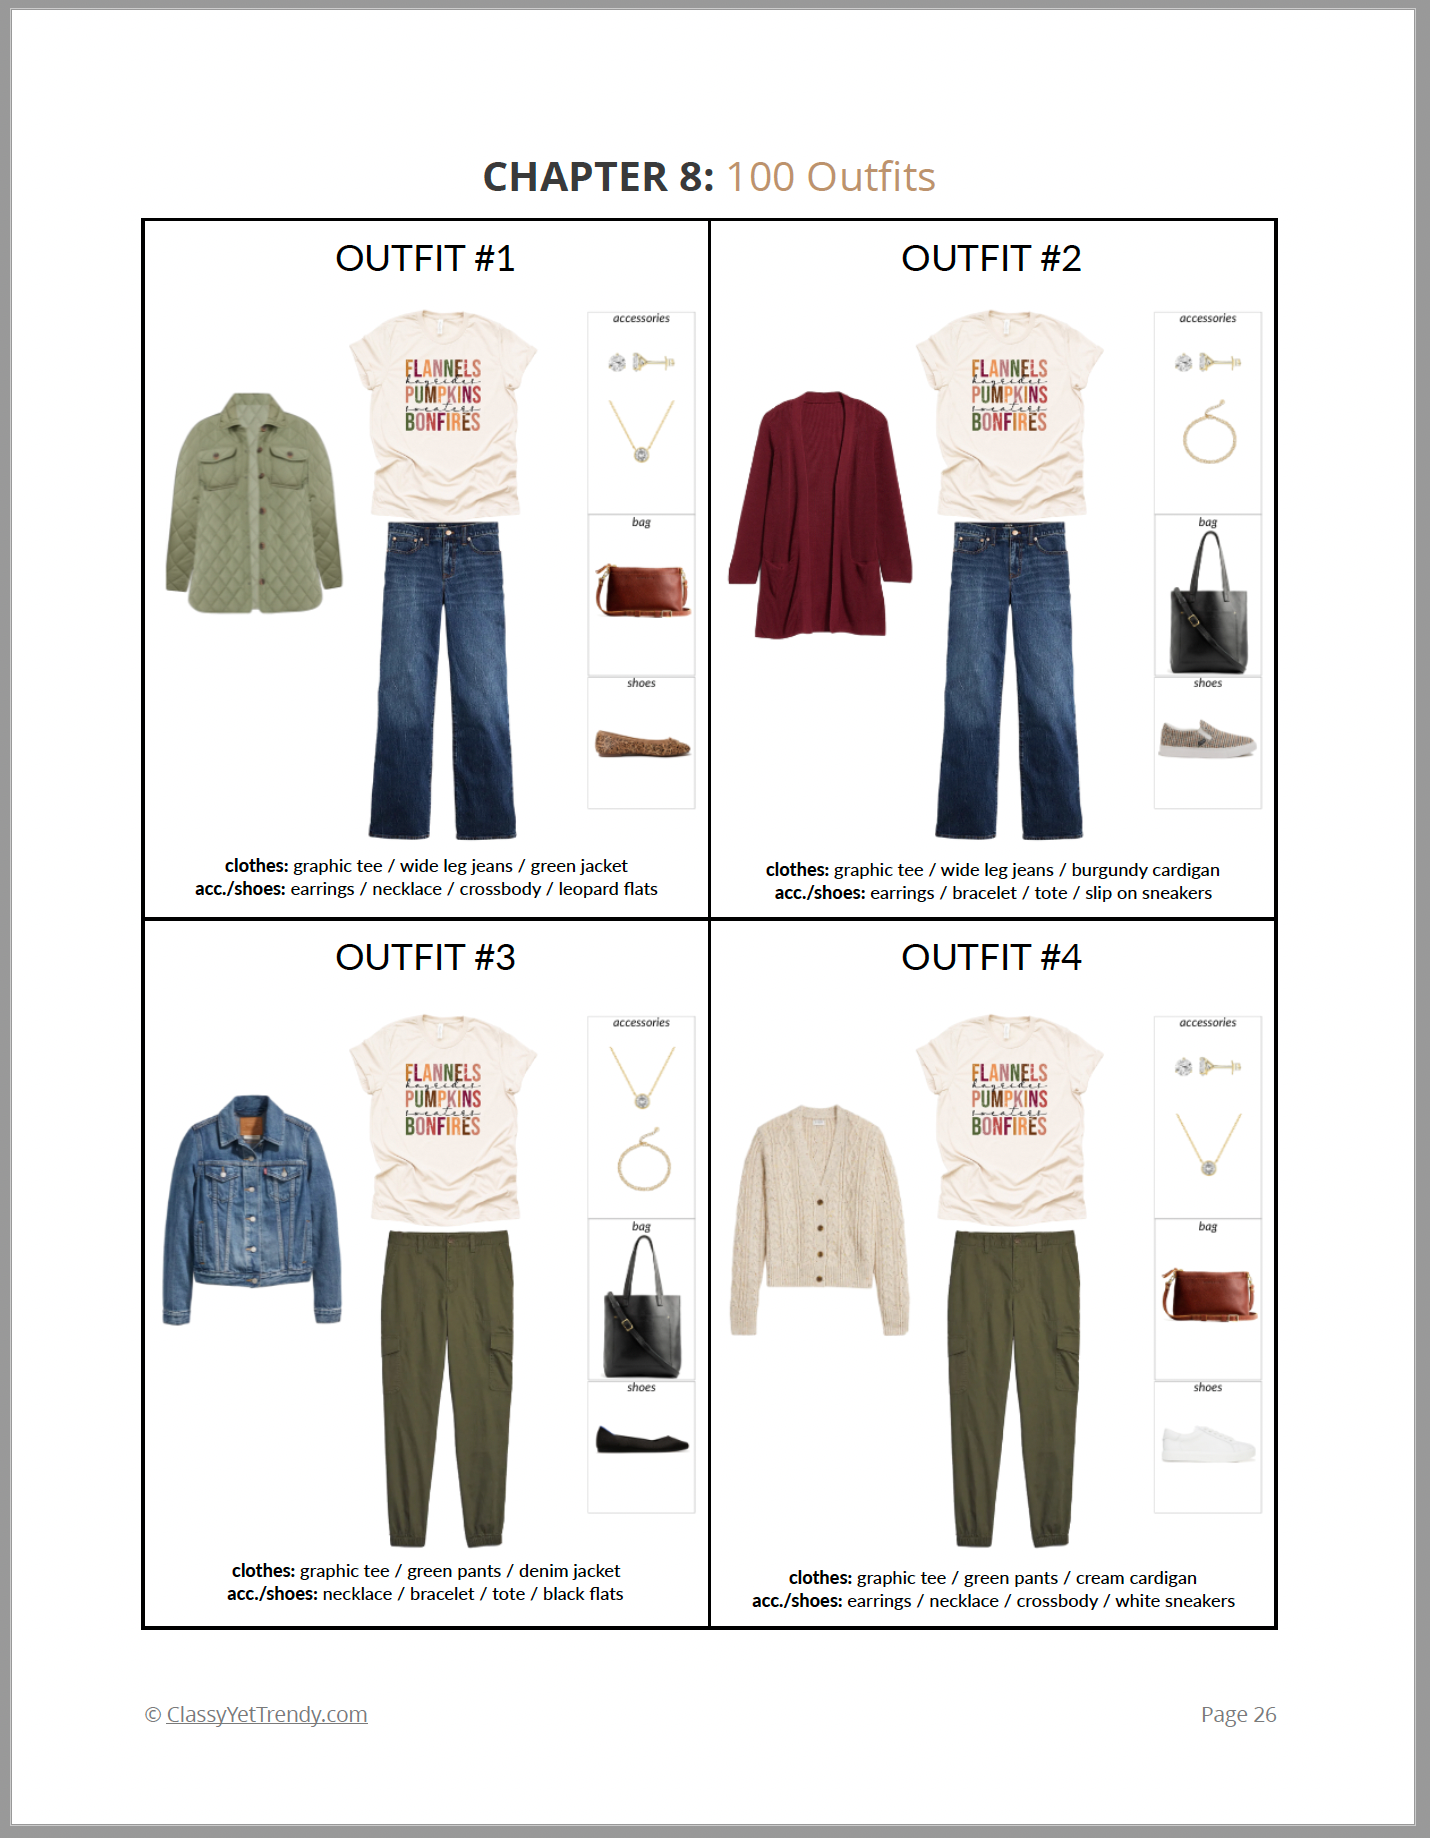 The Stay At Home Mom Capsule Wardrobe - Fall 2022 Collection –  ClassyYetTrendy